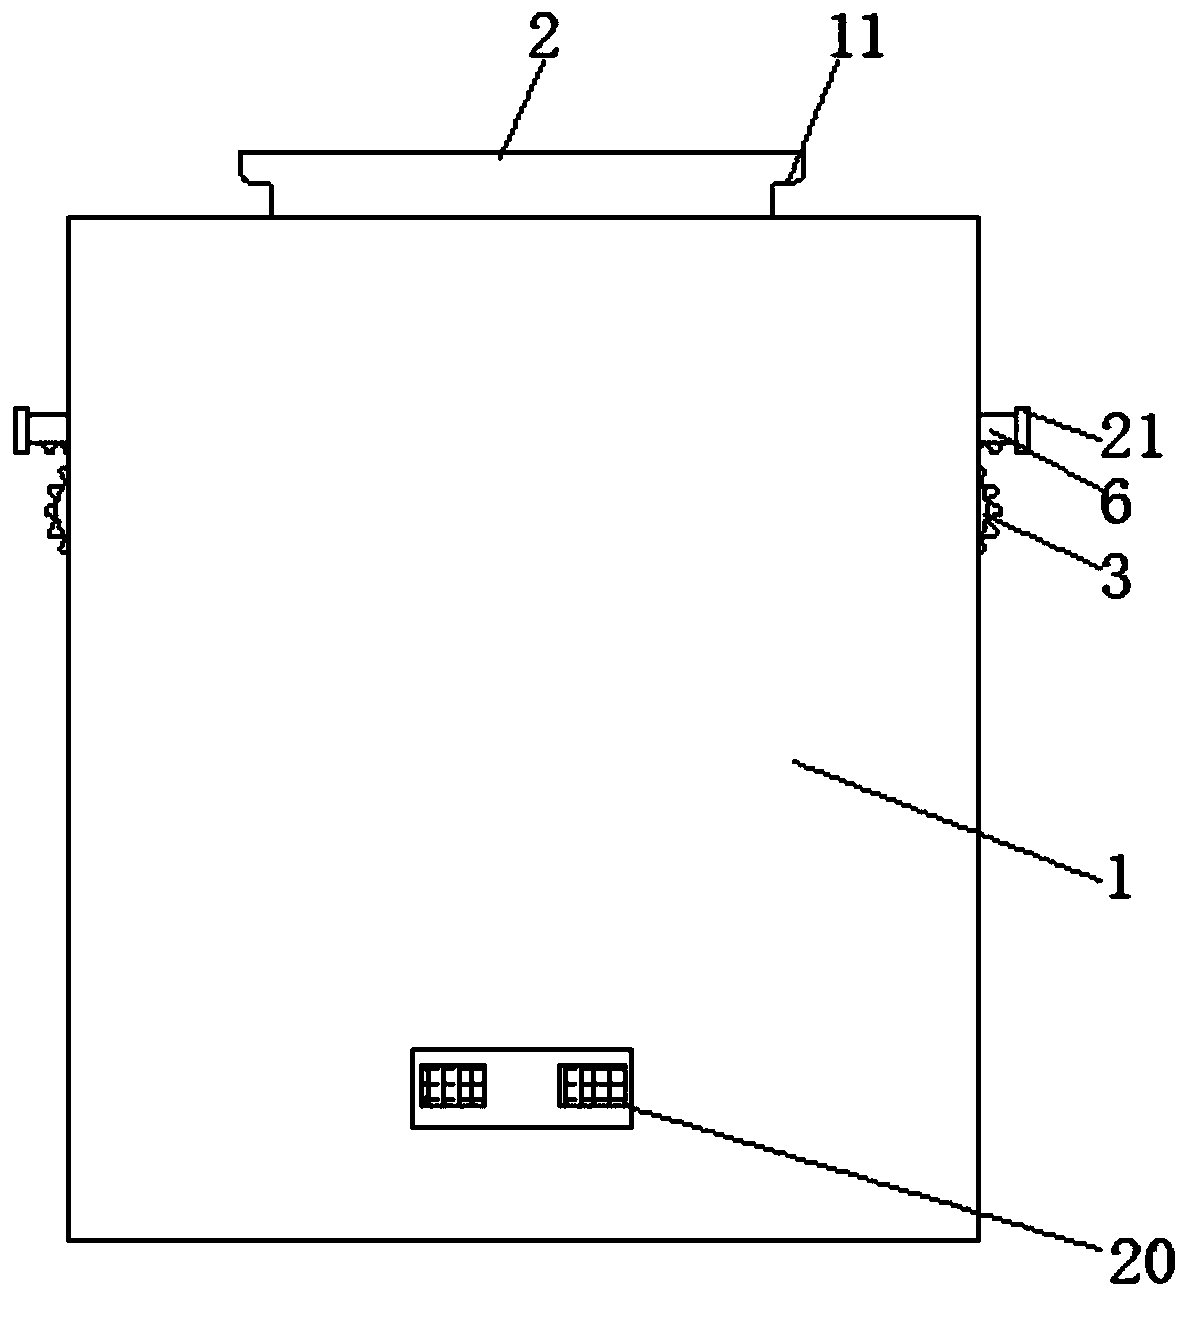 A computer solid state disk installation structure